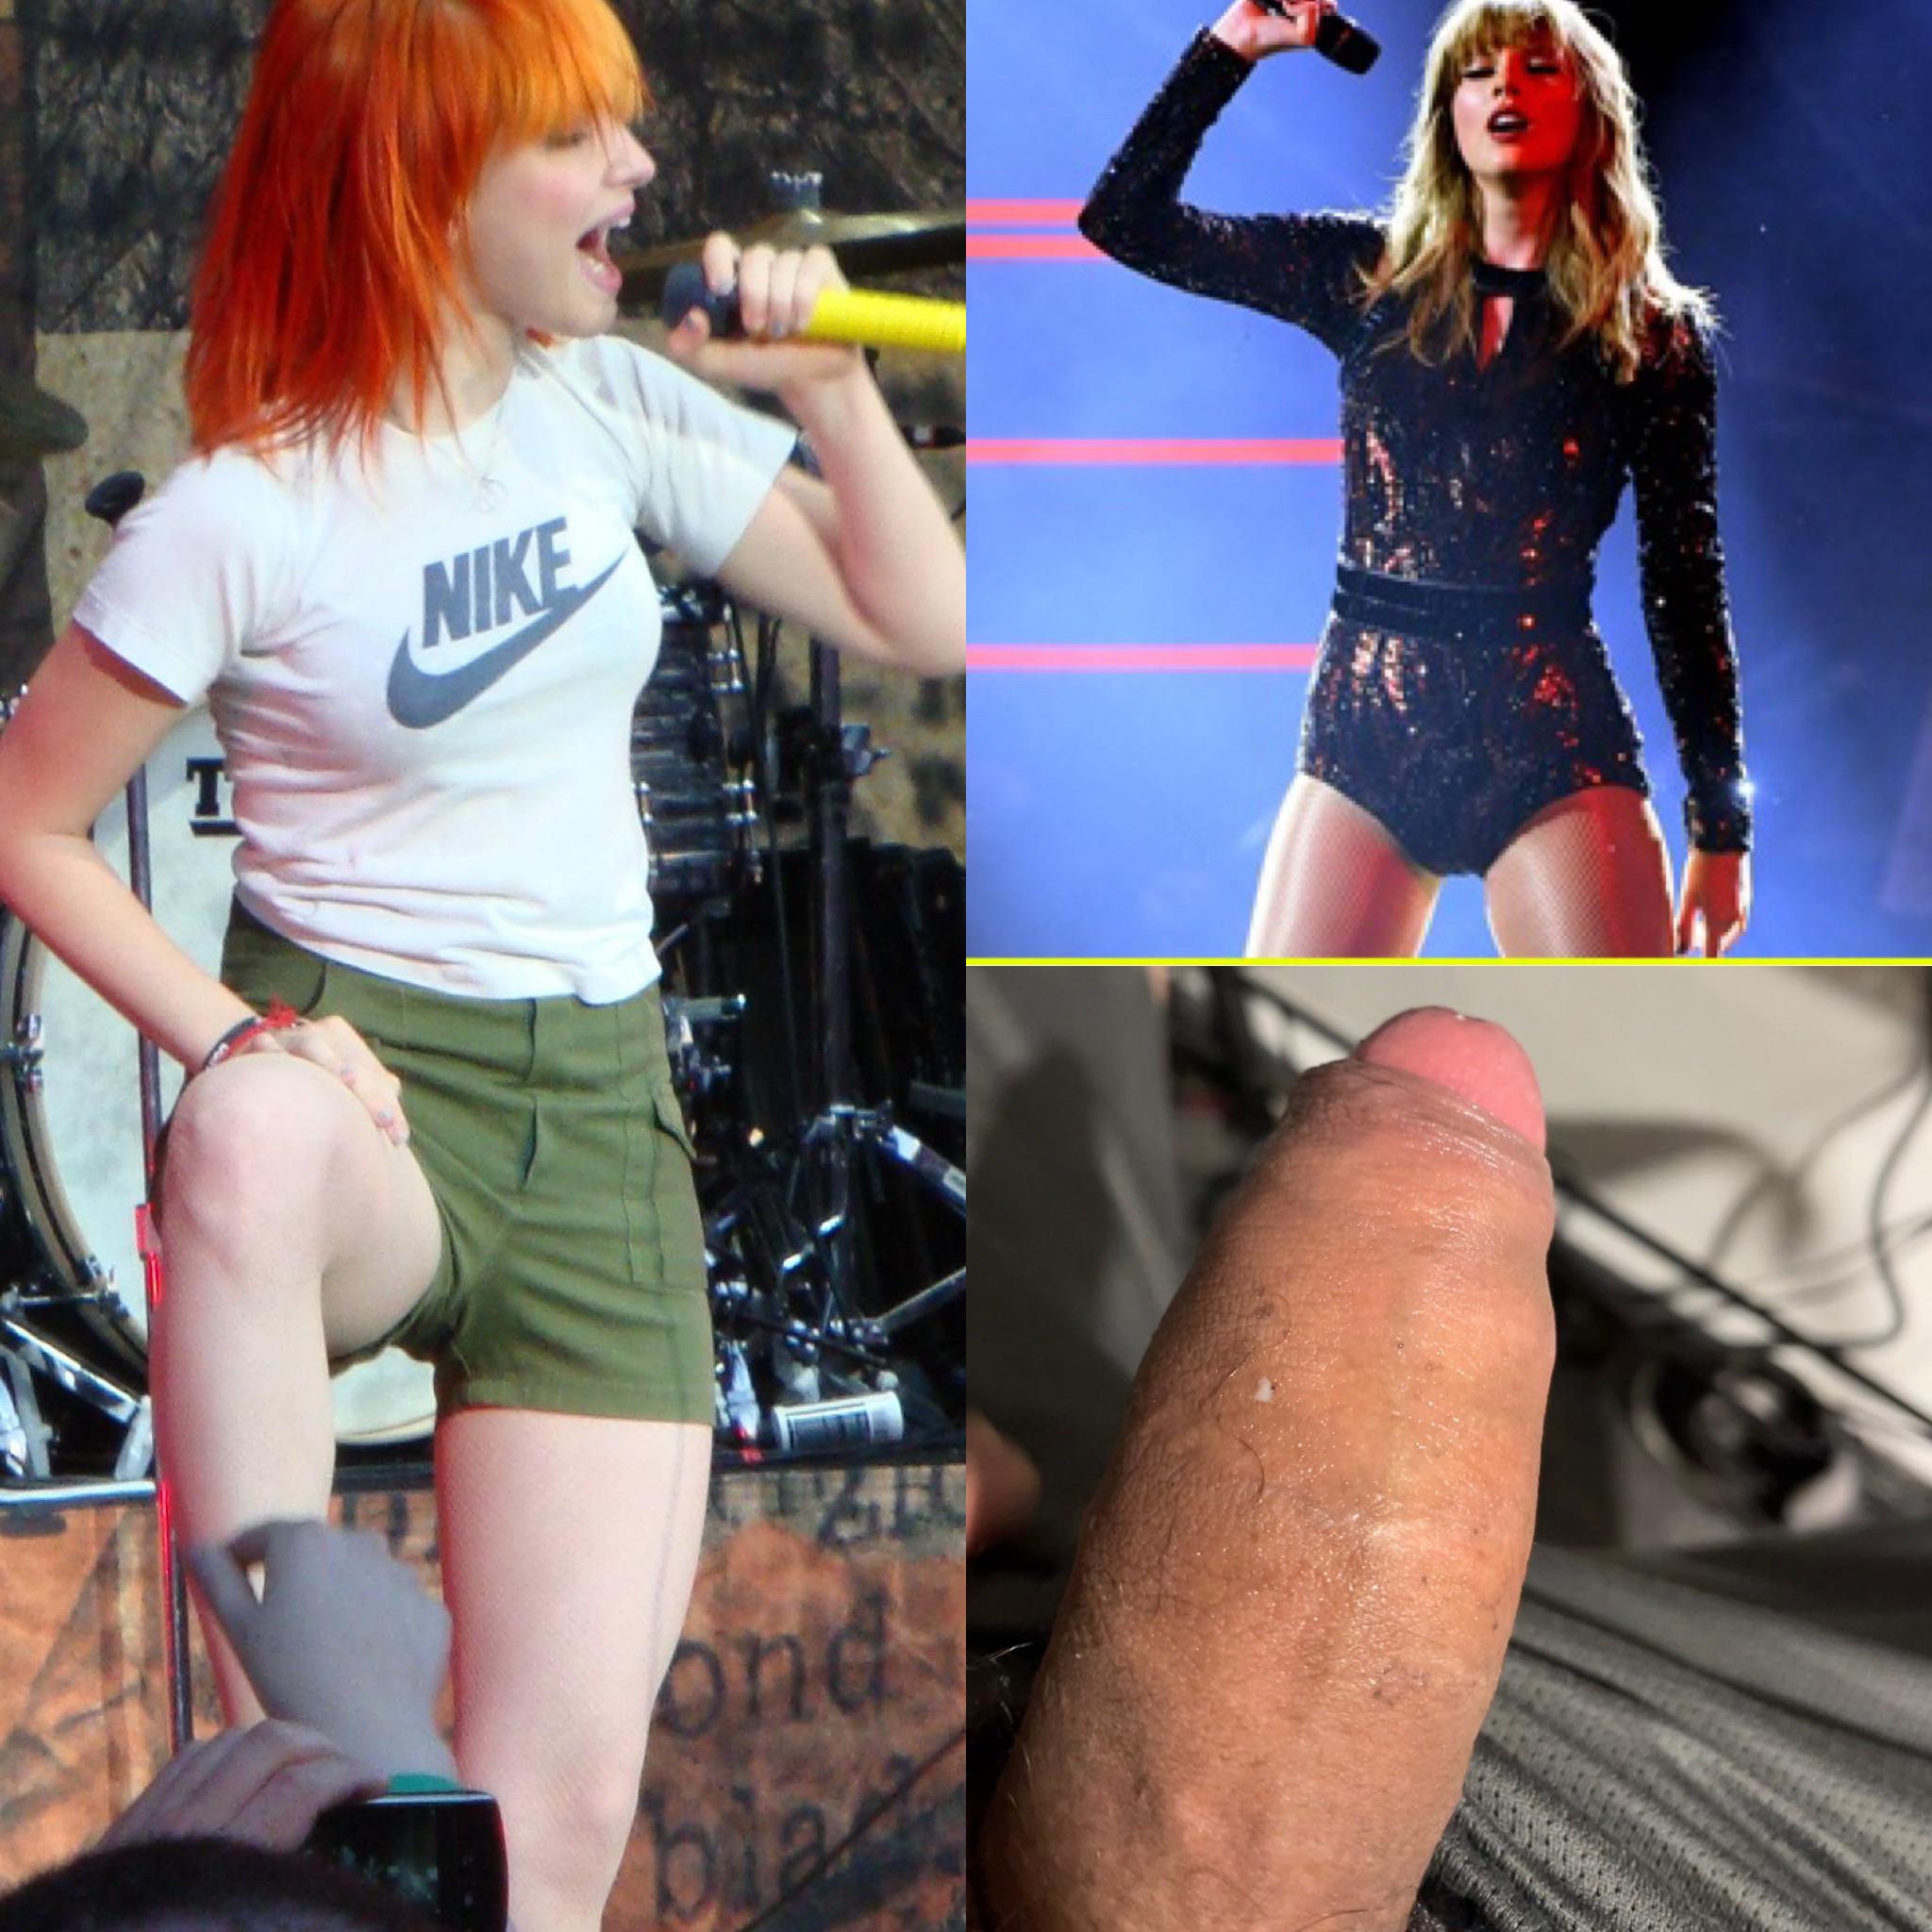 Mmm Taylor Swift and Hayley Williams really know how to